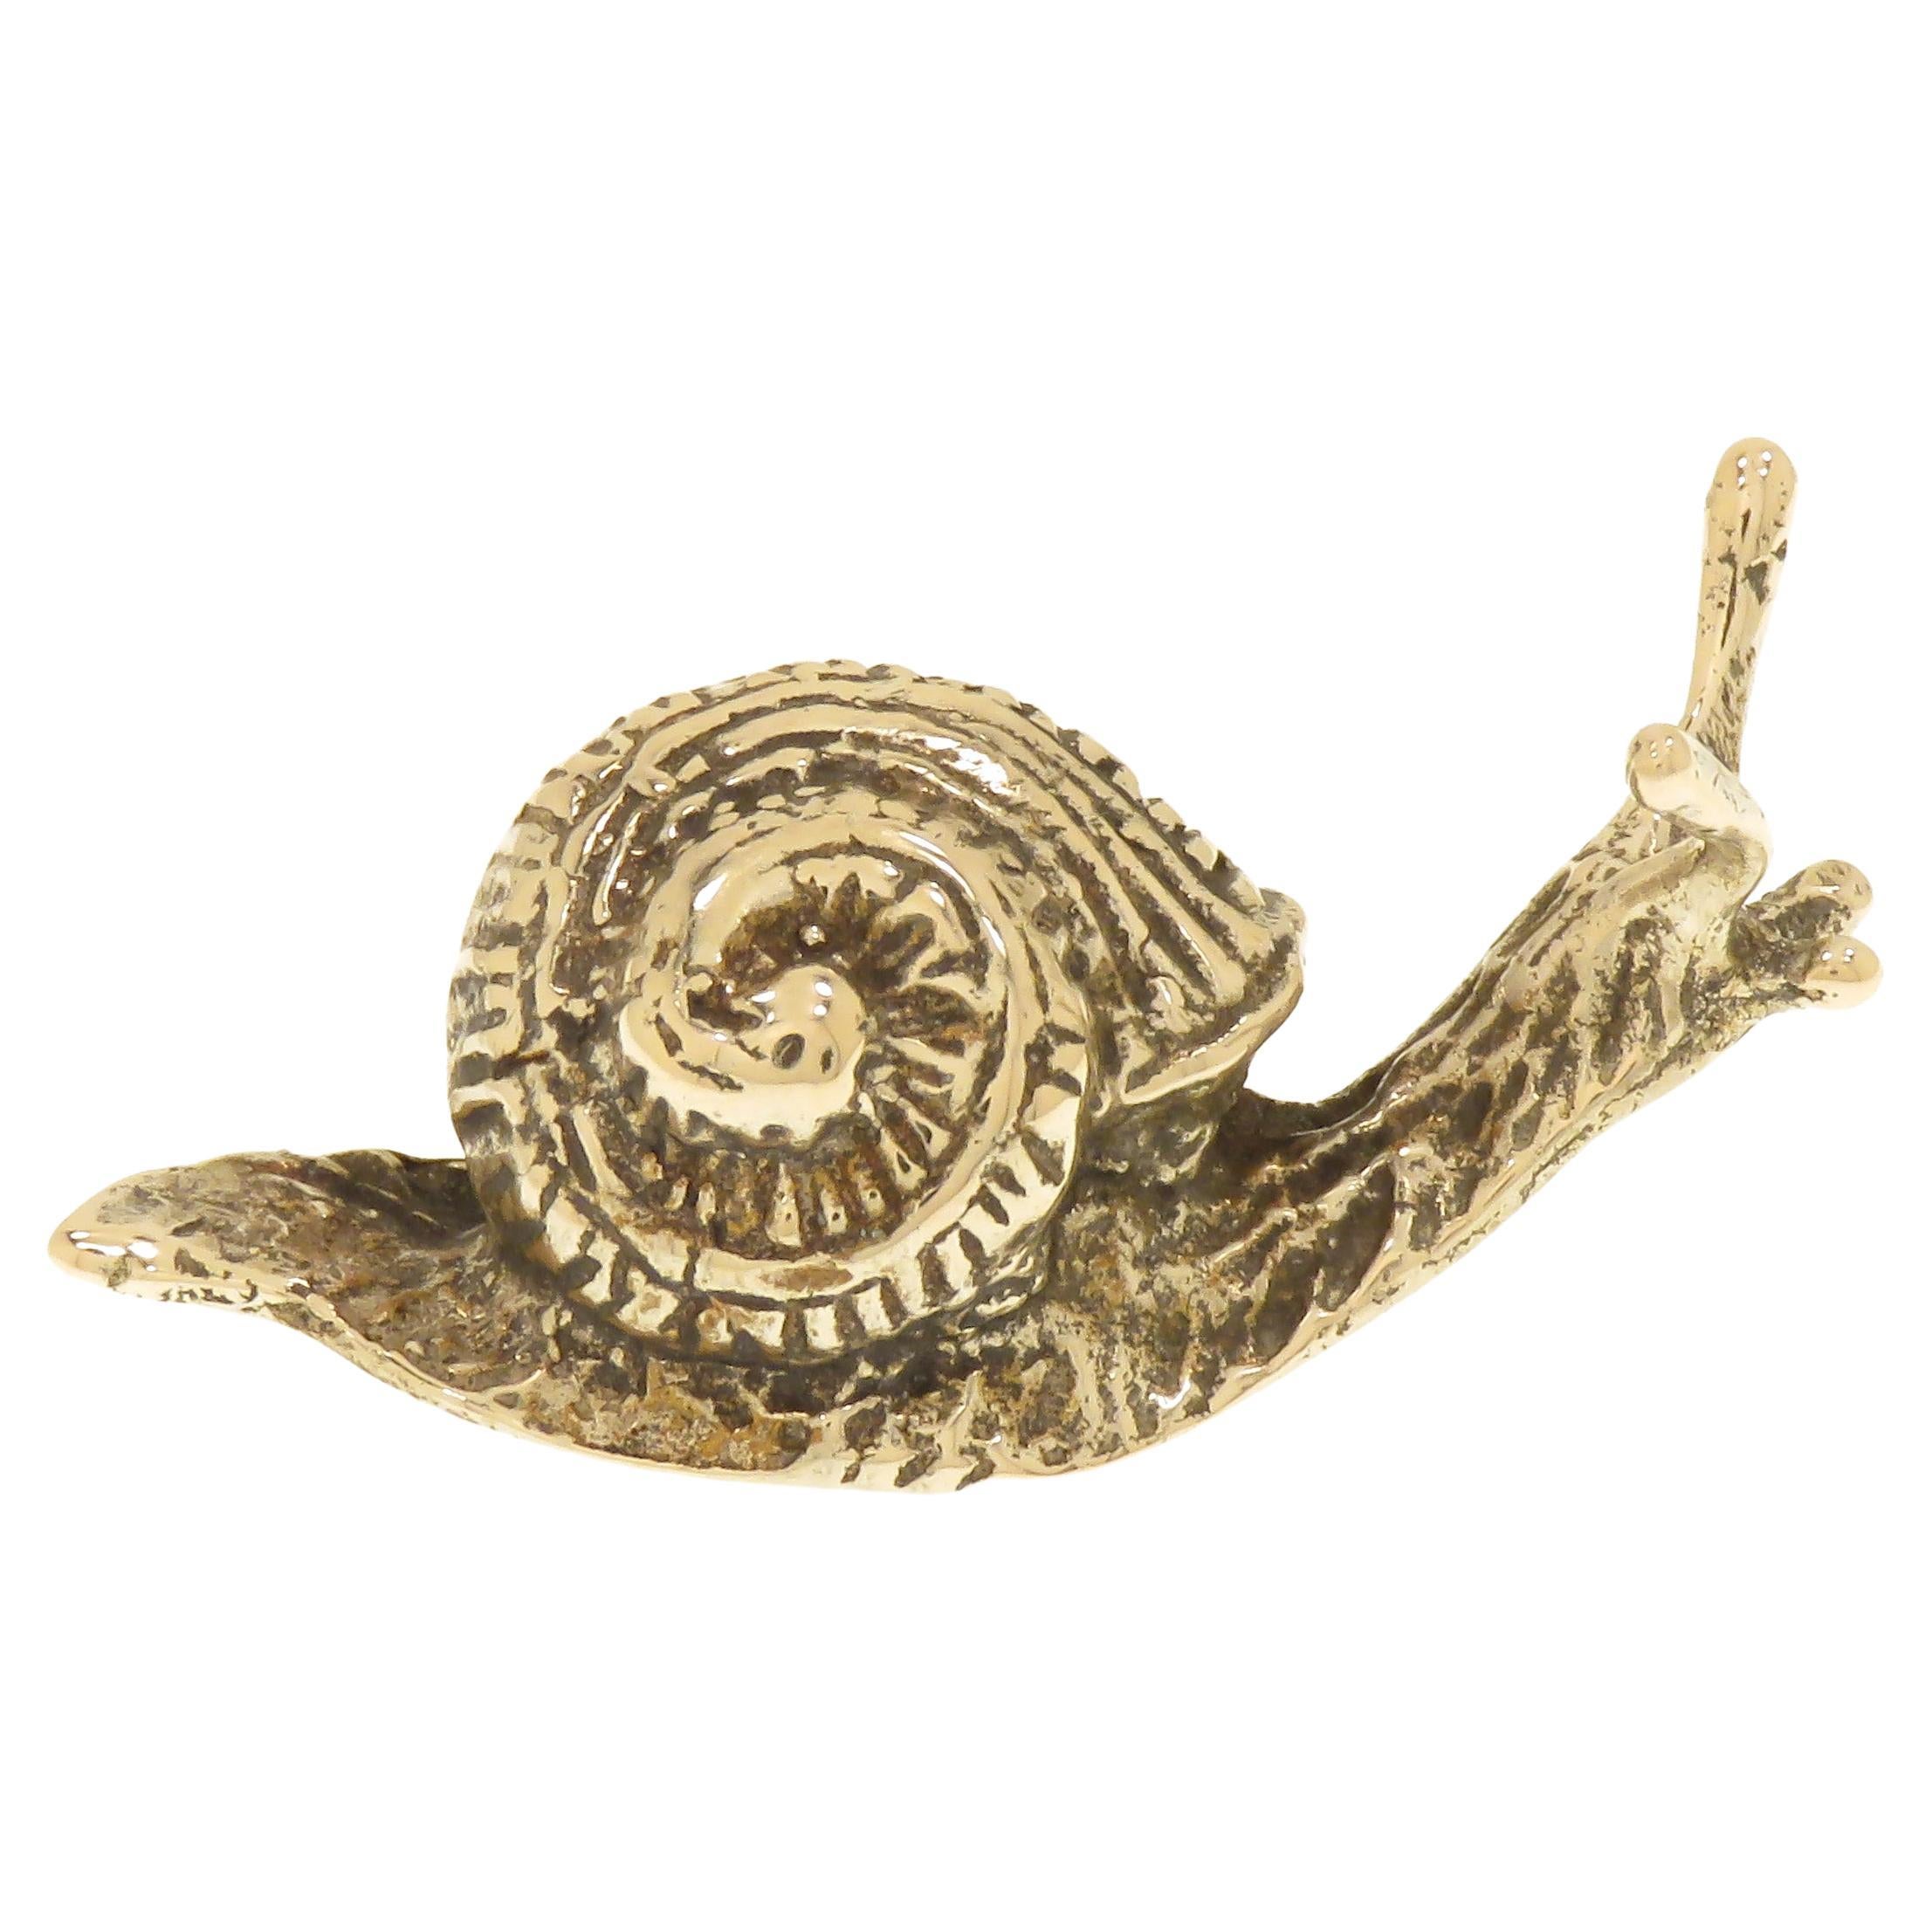 Solid Silver Snail Figurine Vintage 1970s Made in Italy For Sale